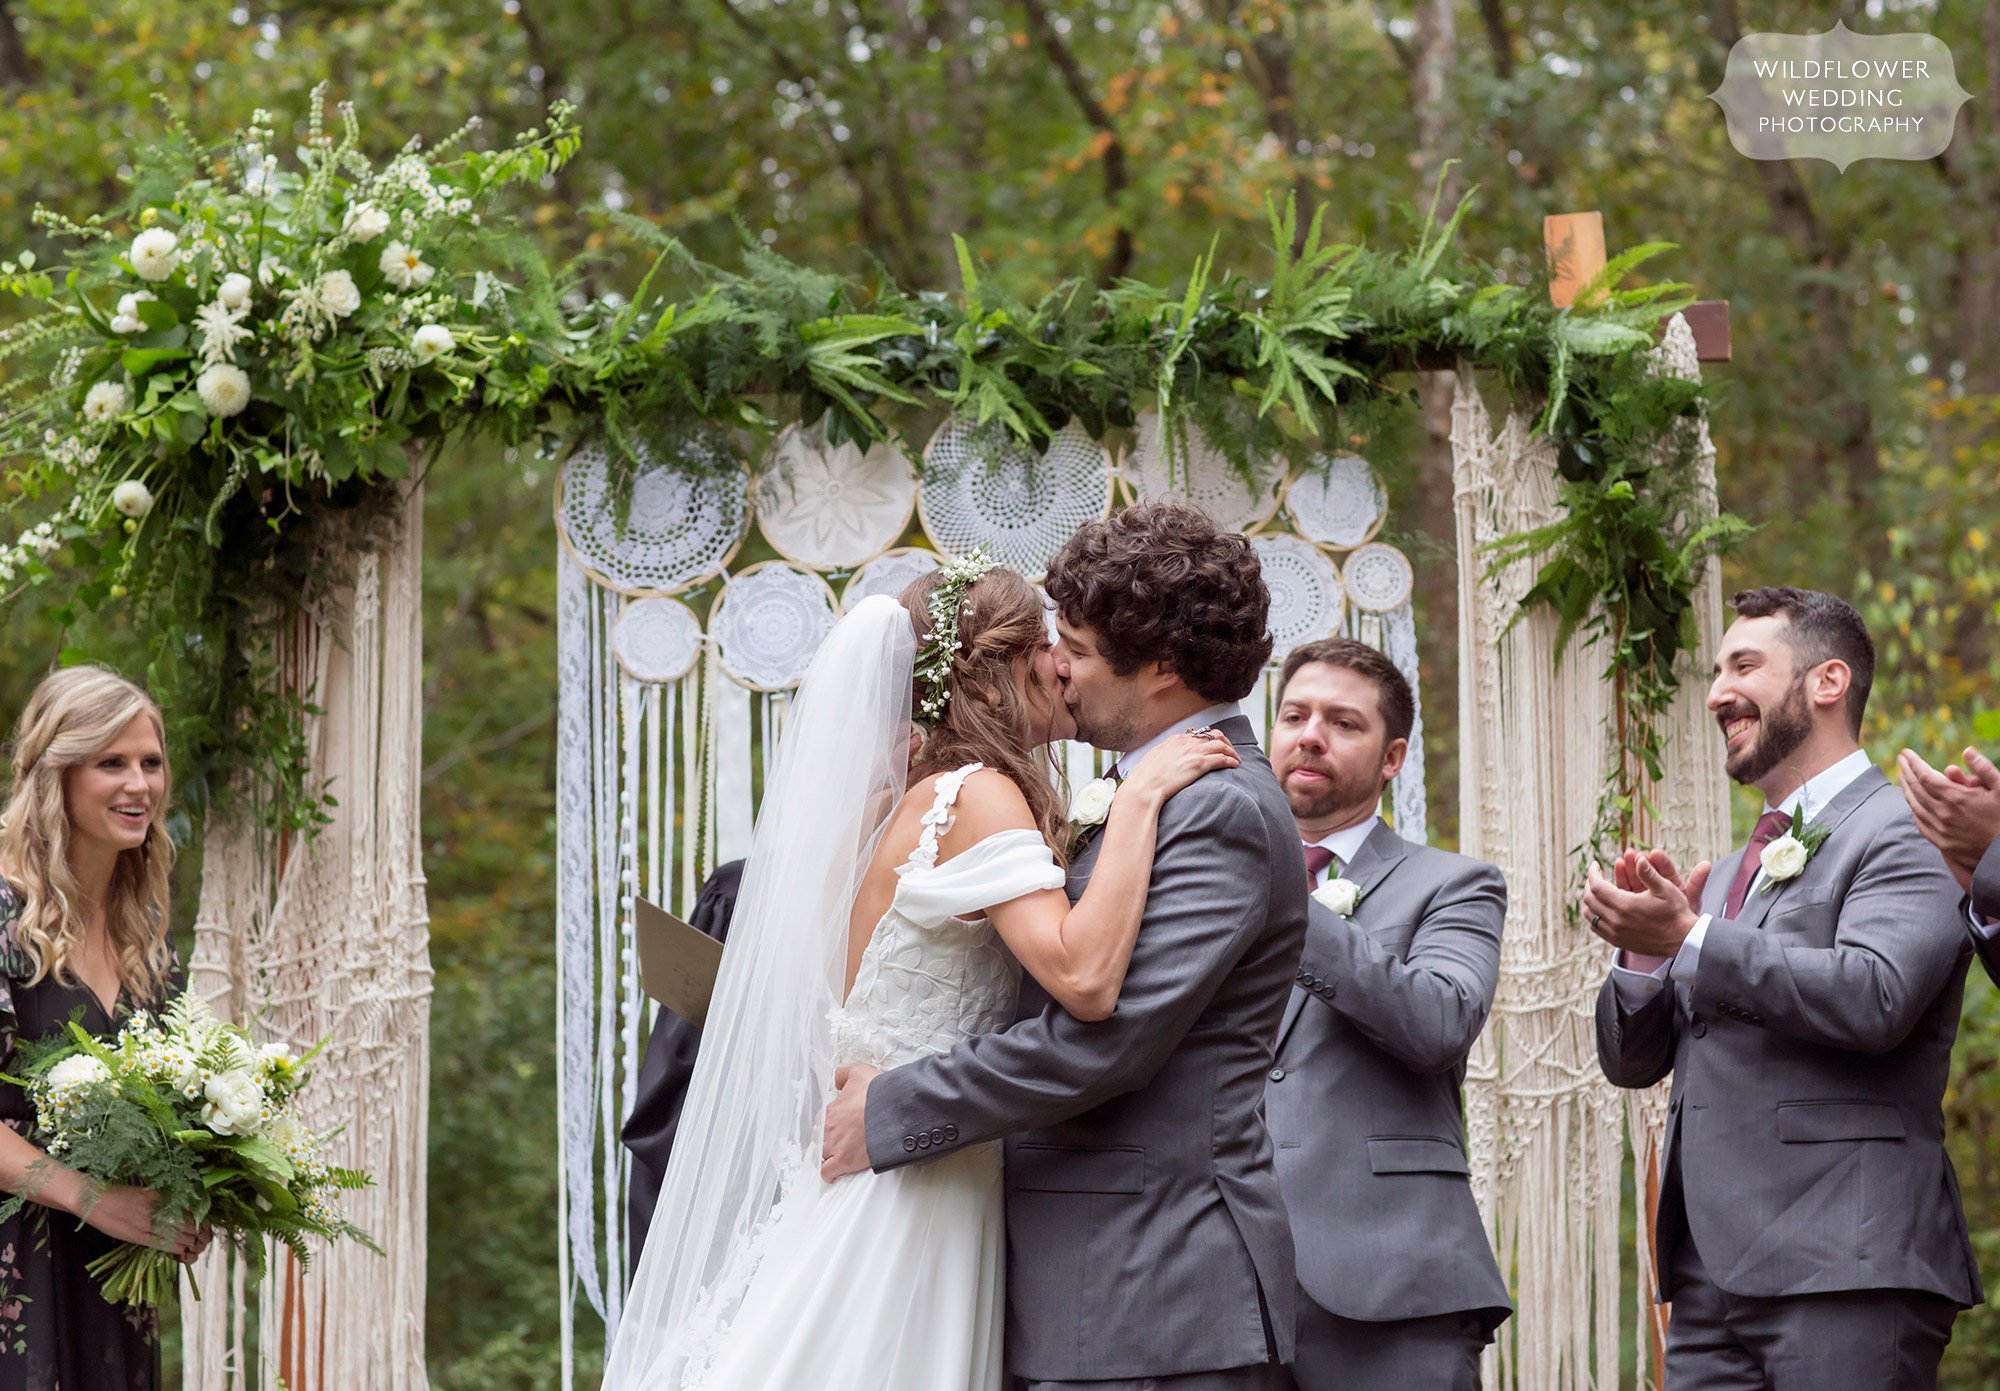 The bride and groom kiss at the end of their outdoor wedding ceremony at Little Piney Lodge.